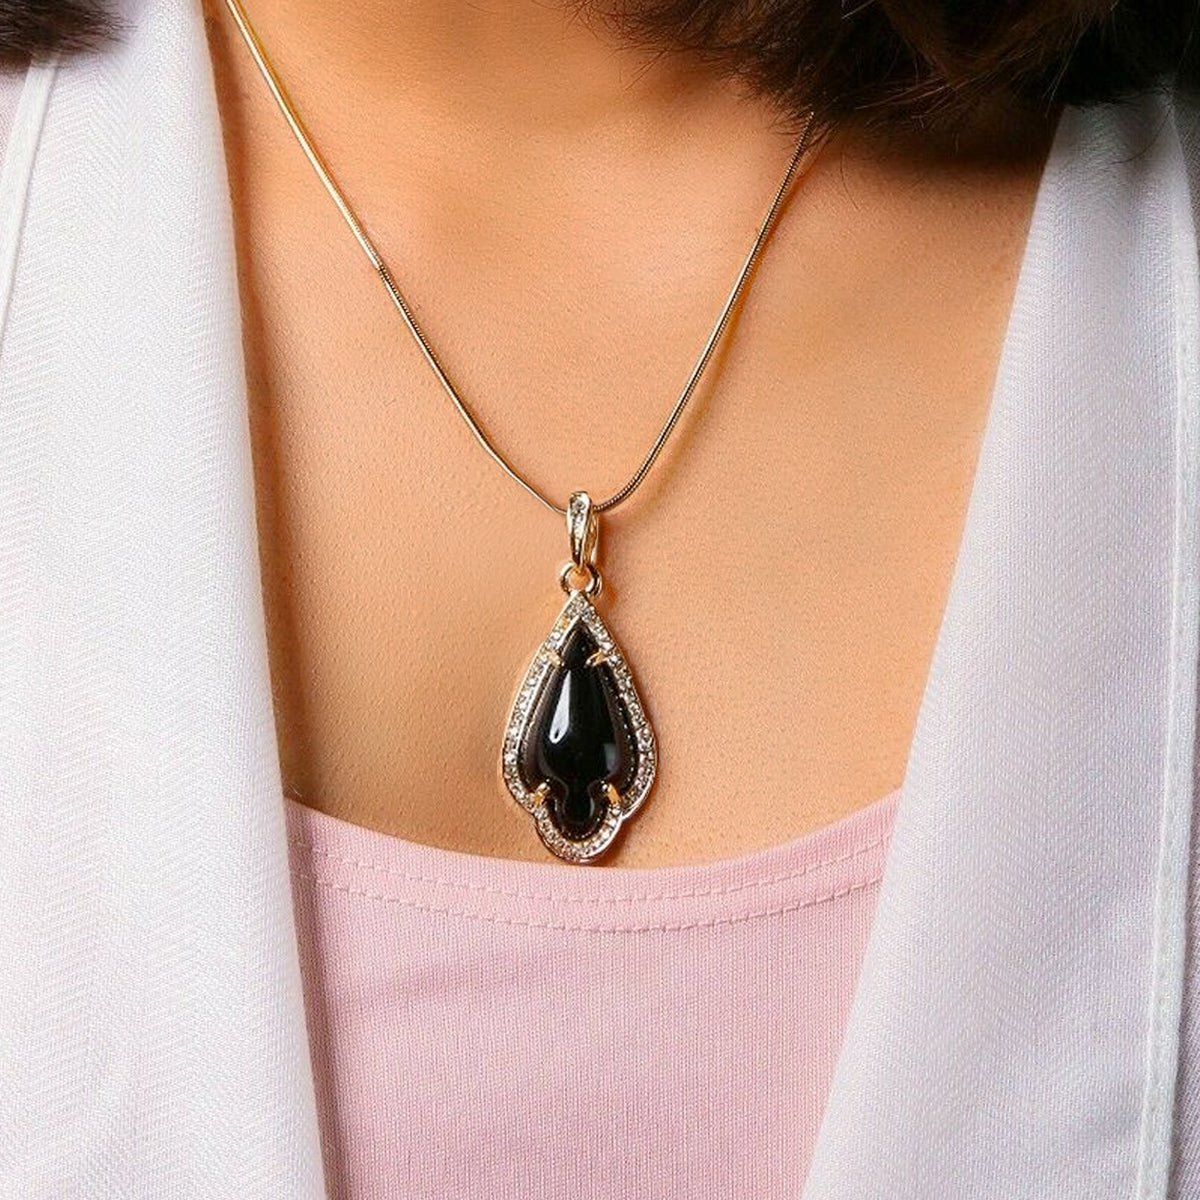 Black Women's Pendants 14K Gold Plated Lab Diamond Mounted Curved Tear Resin Jade High Fashion Jewelry Chain Pendant Necklaces